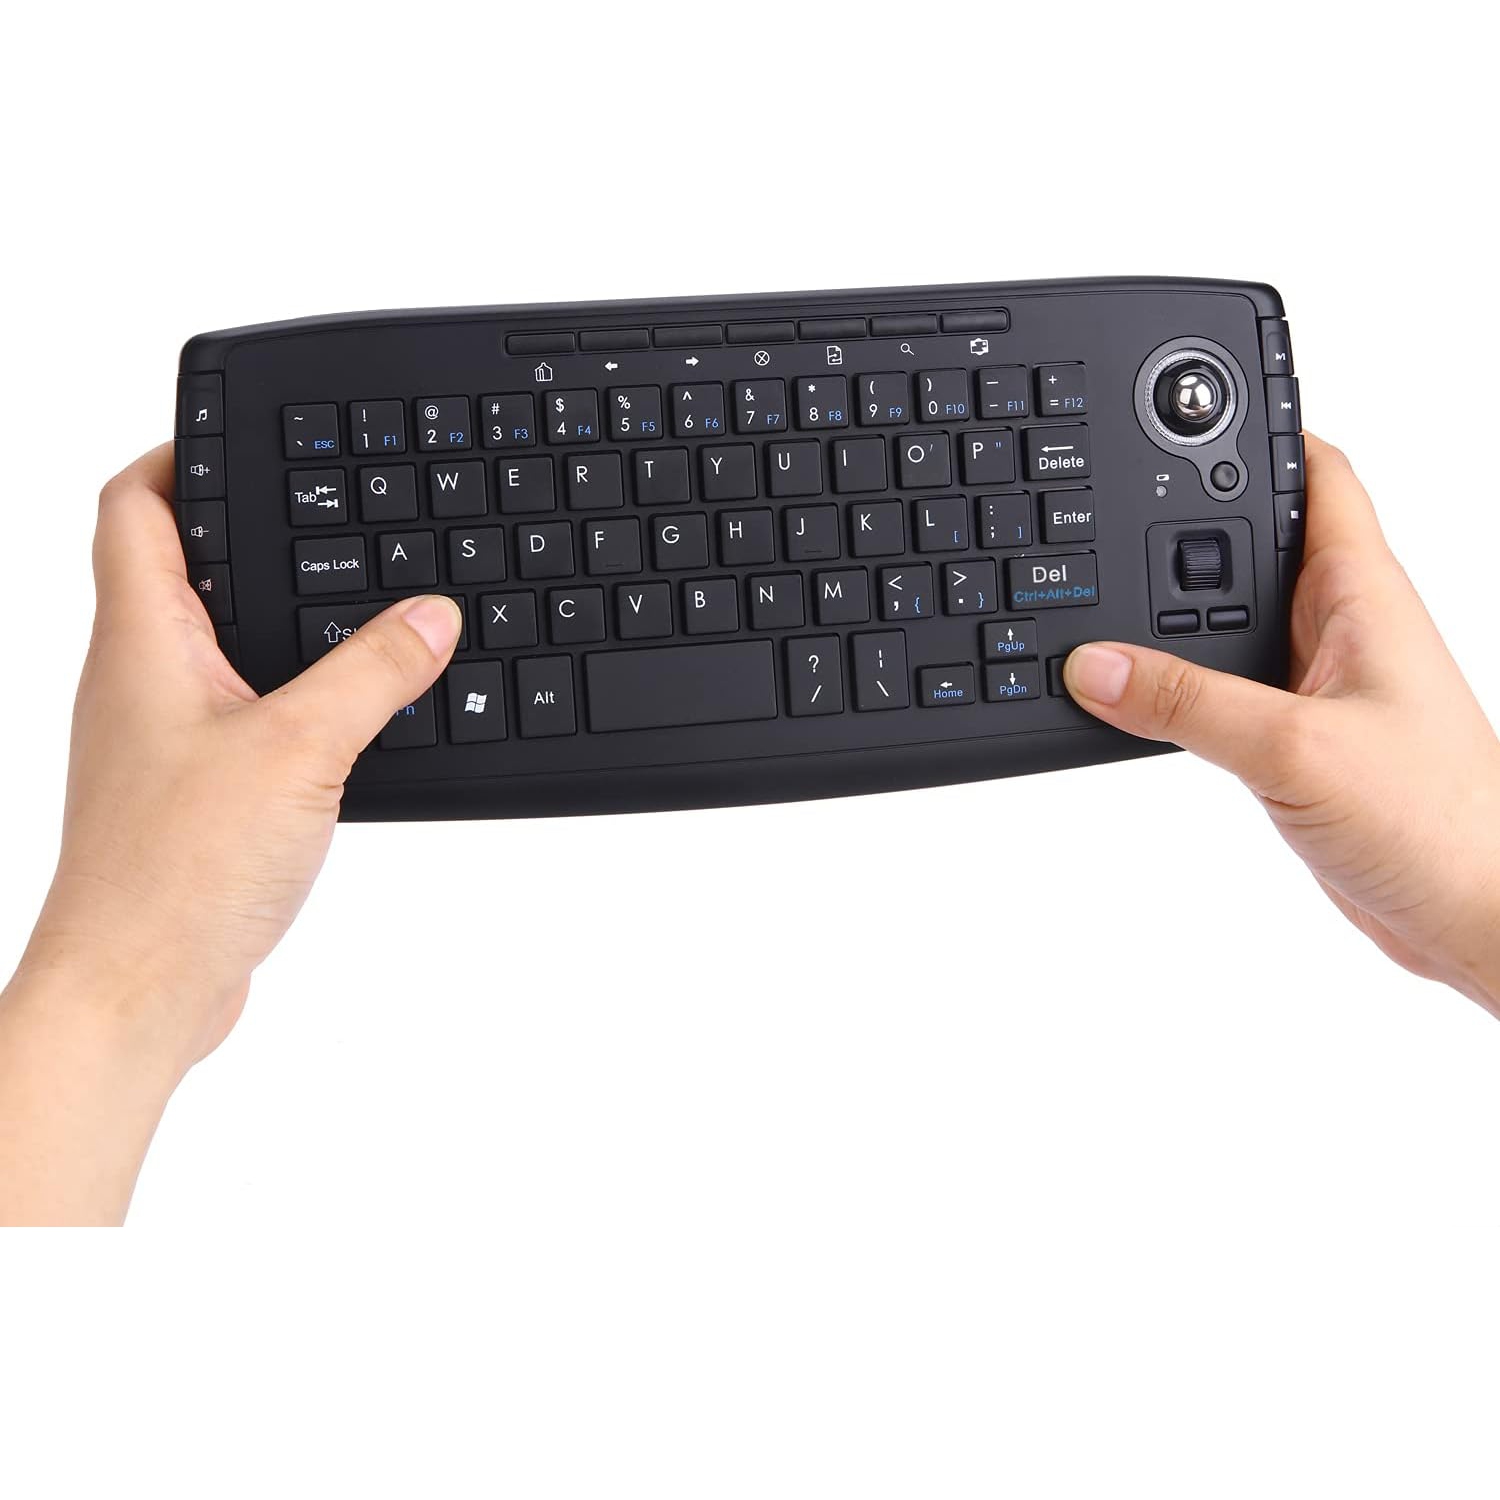 Mini 2.4Ghz Wireless Keyboard with Trackball Mouse Scroll Wheel for PC, Pad, Xbox 360, Ps3, Google Android TV